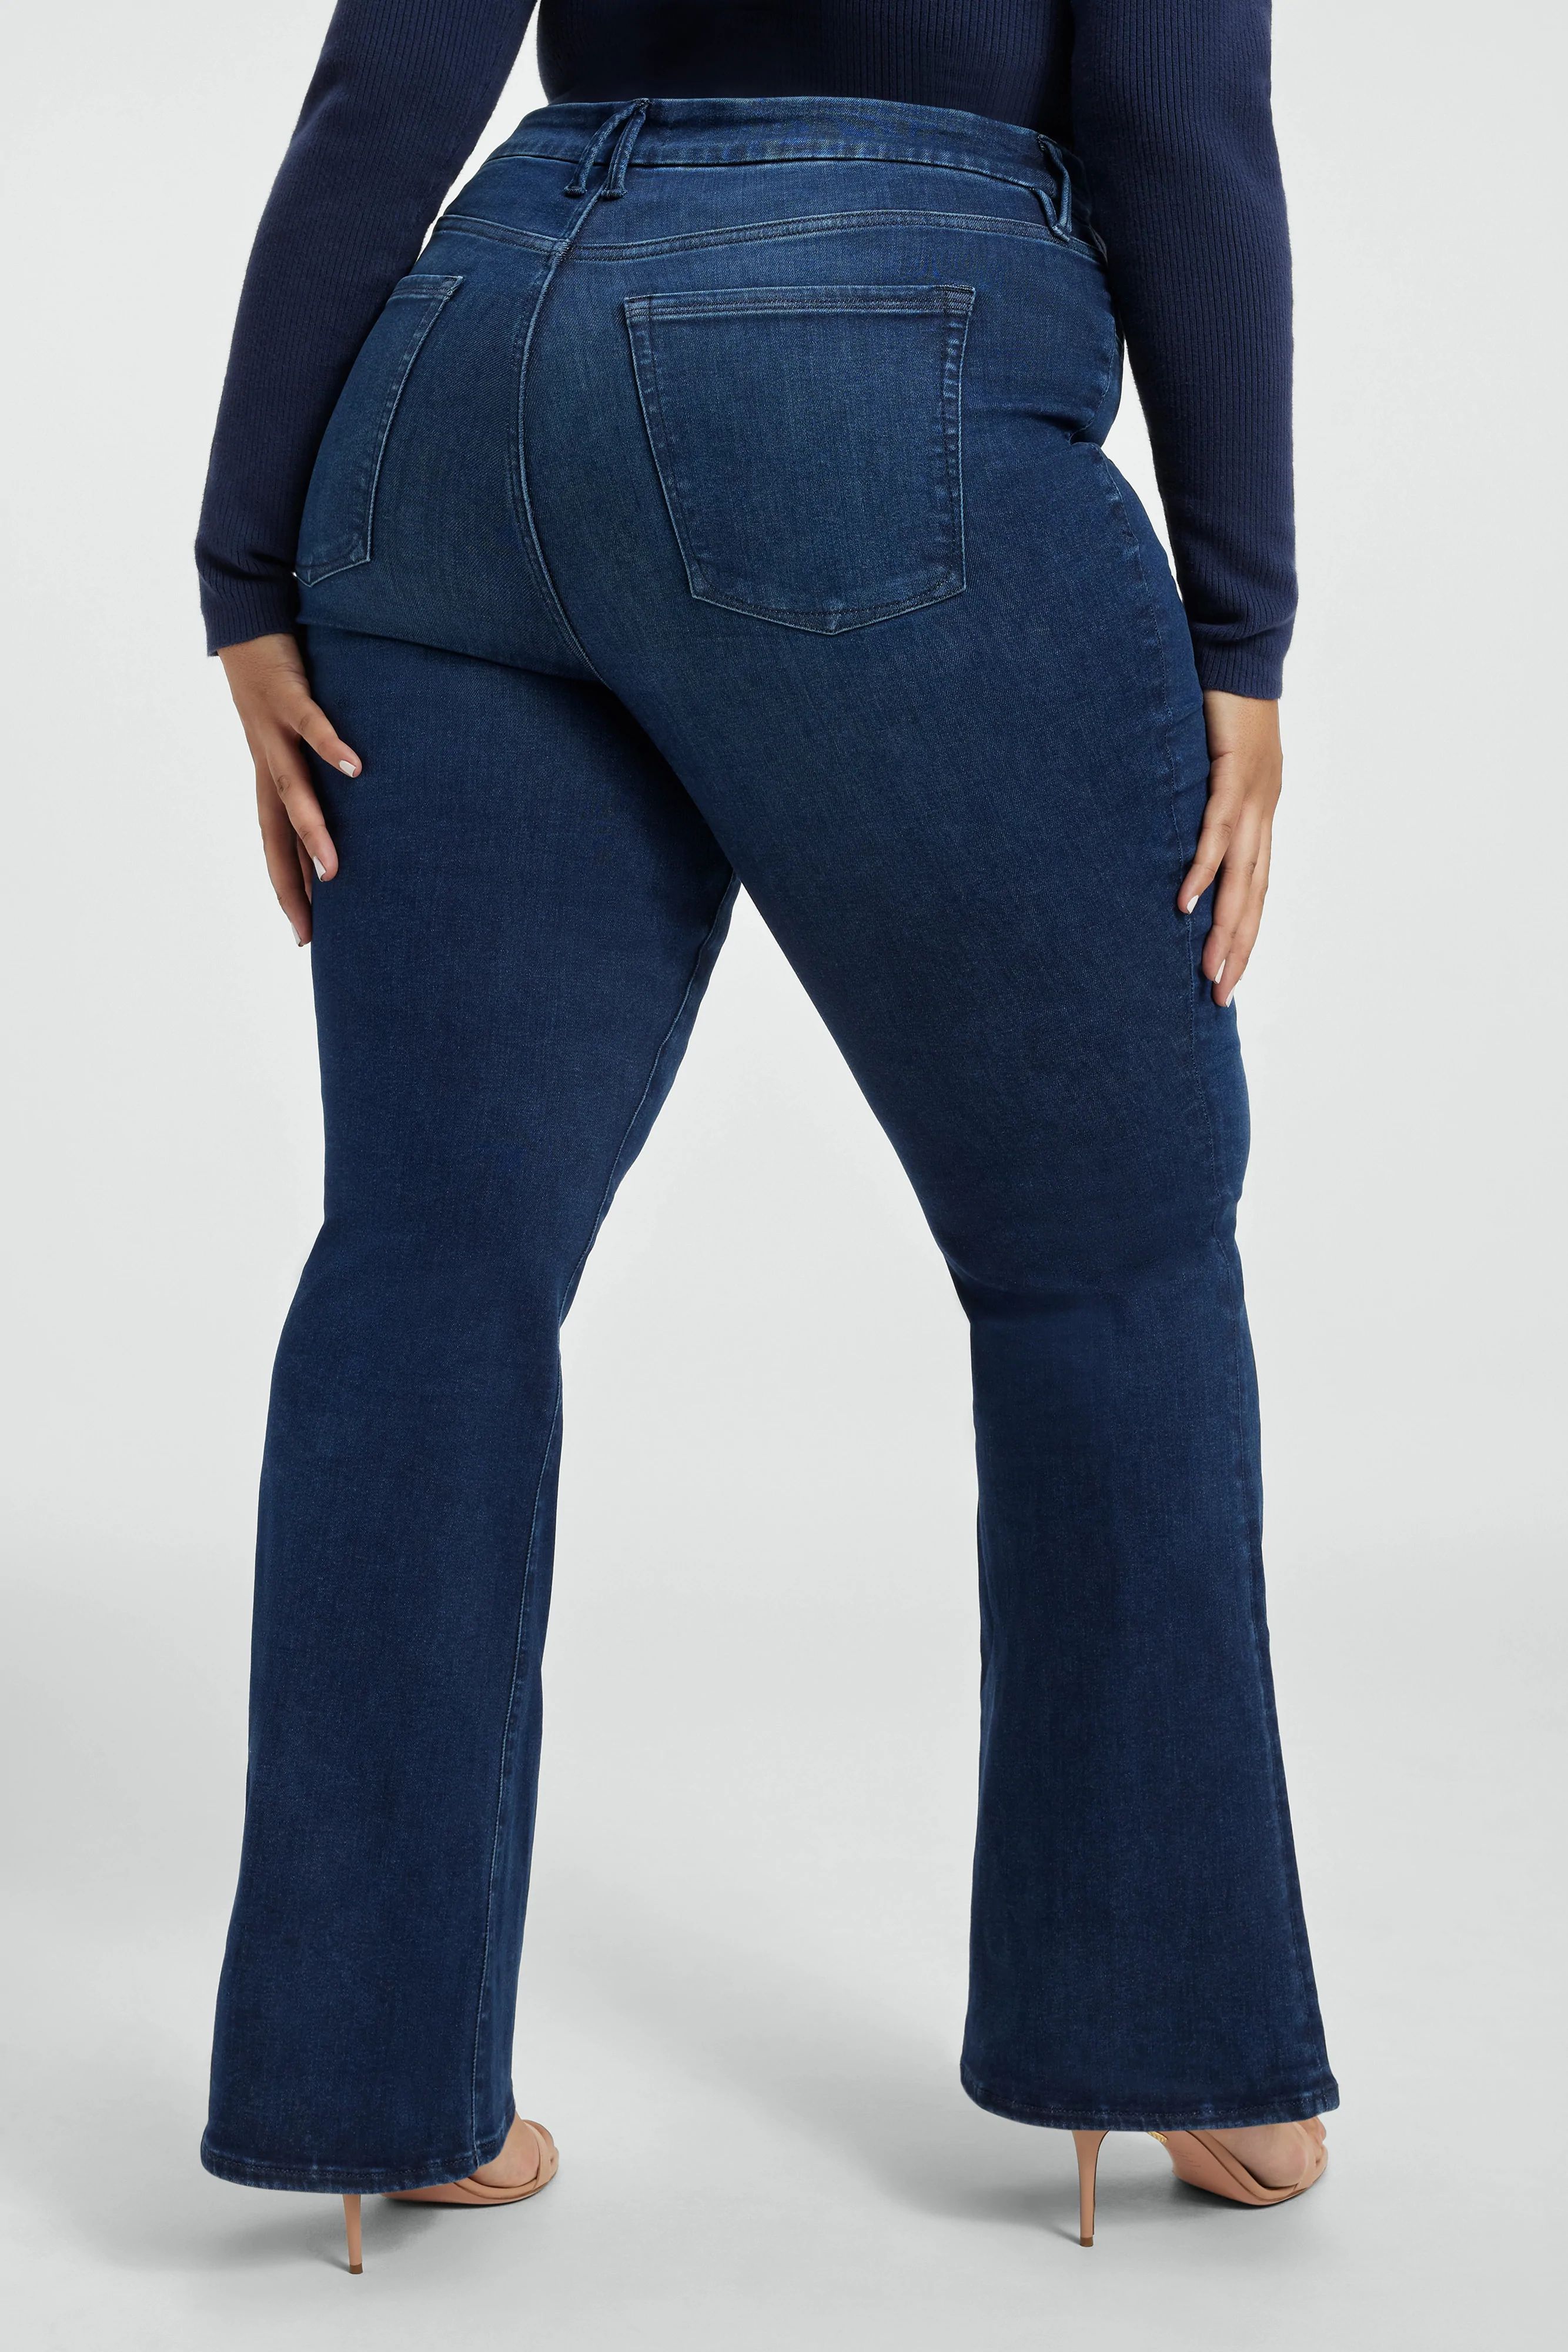 POWER STRETCH PULL-ON FLARE JEANS | INDIGO491 | Good American